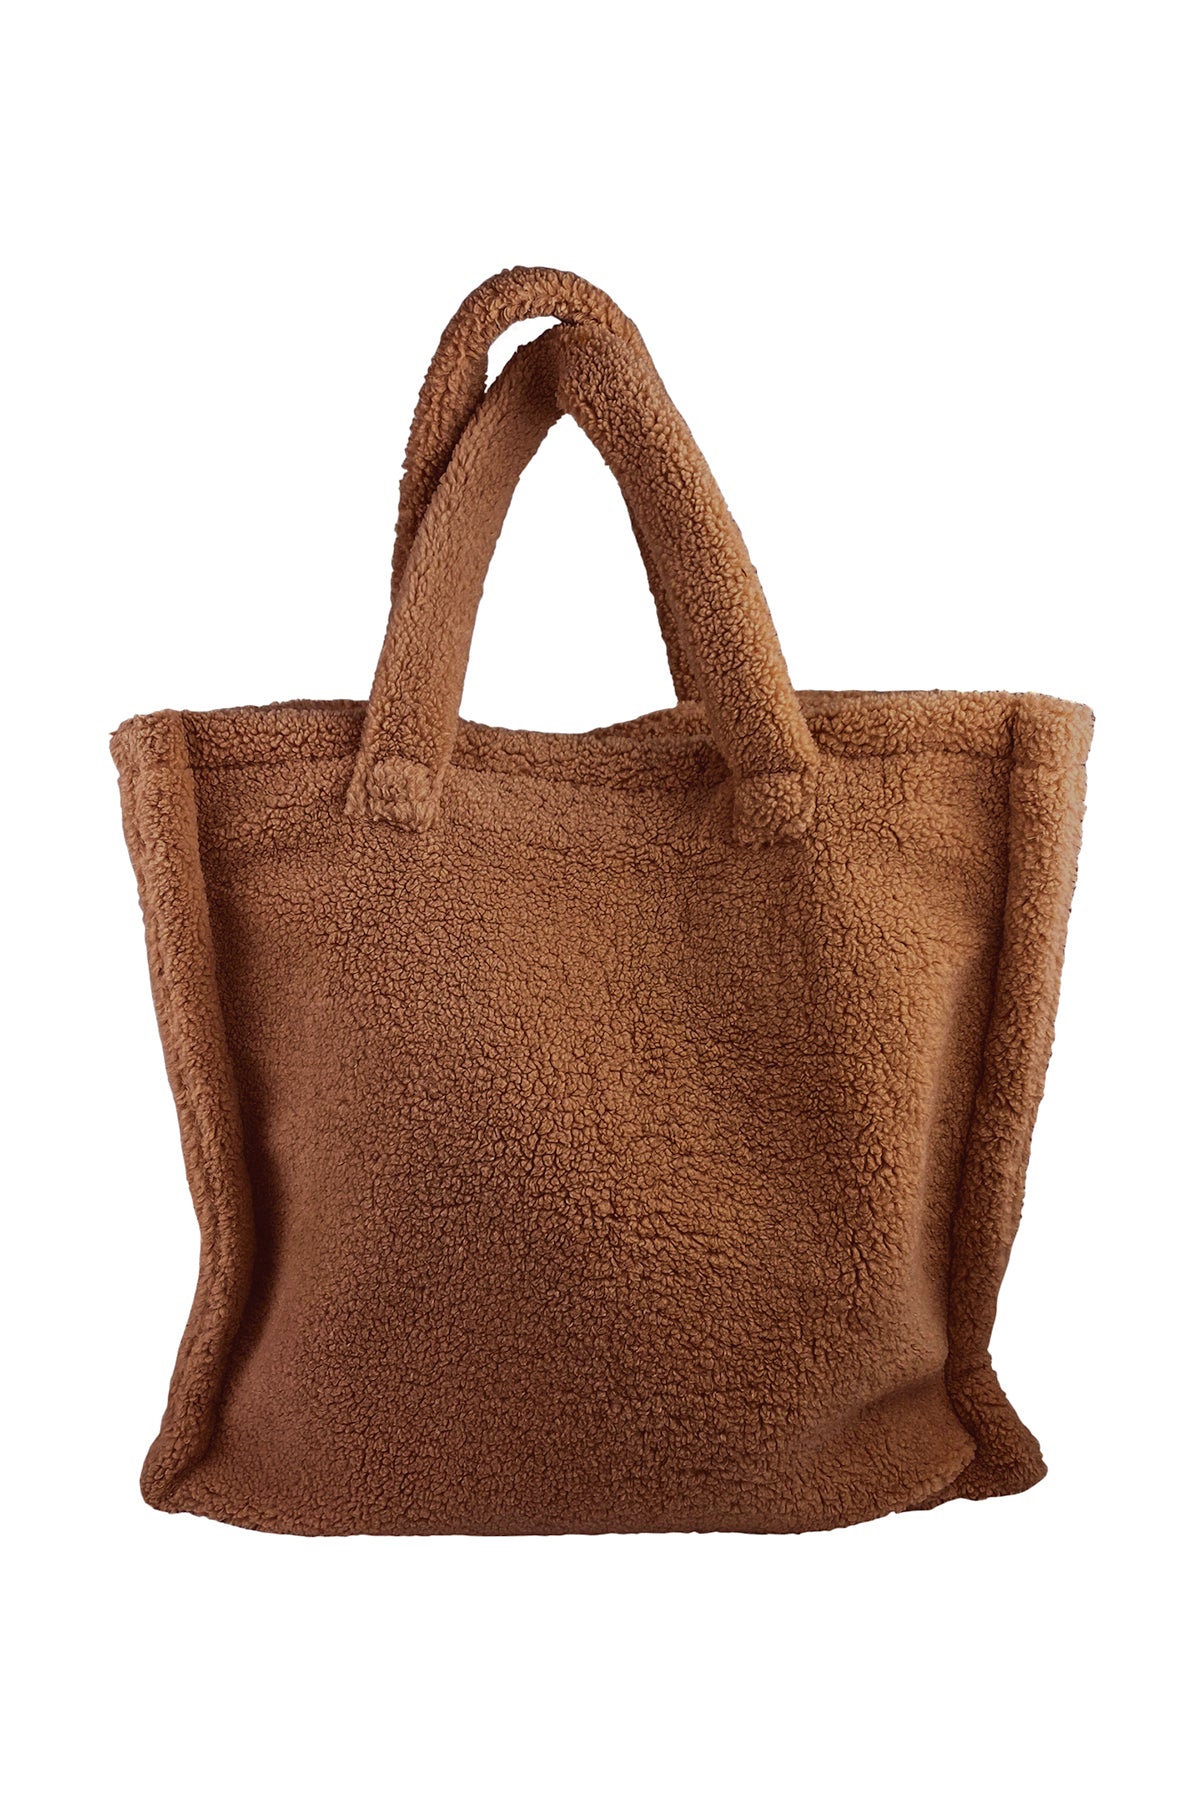 A LARGE TEDDY TOTE by Velvet by Graham & Spencer on a white background, made with faux shearling material.-26897930682561